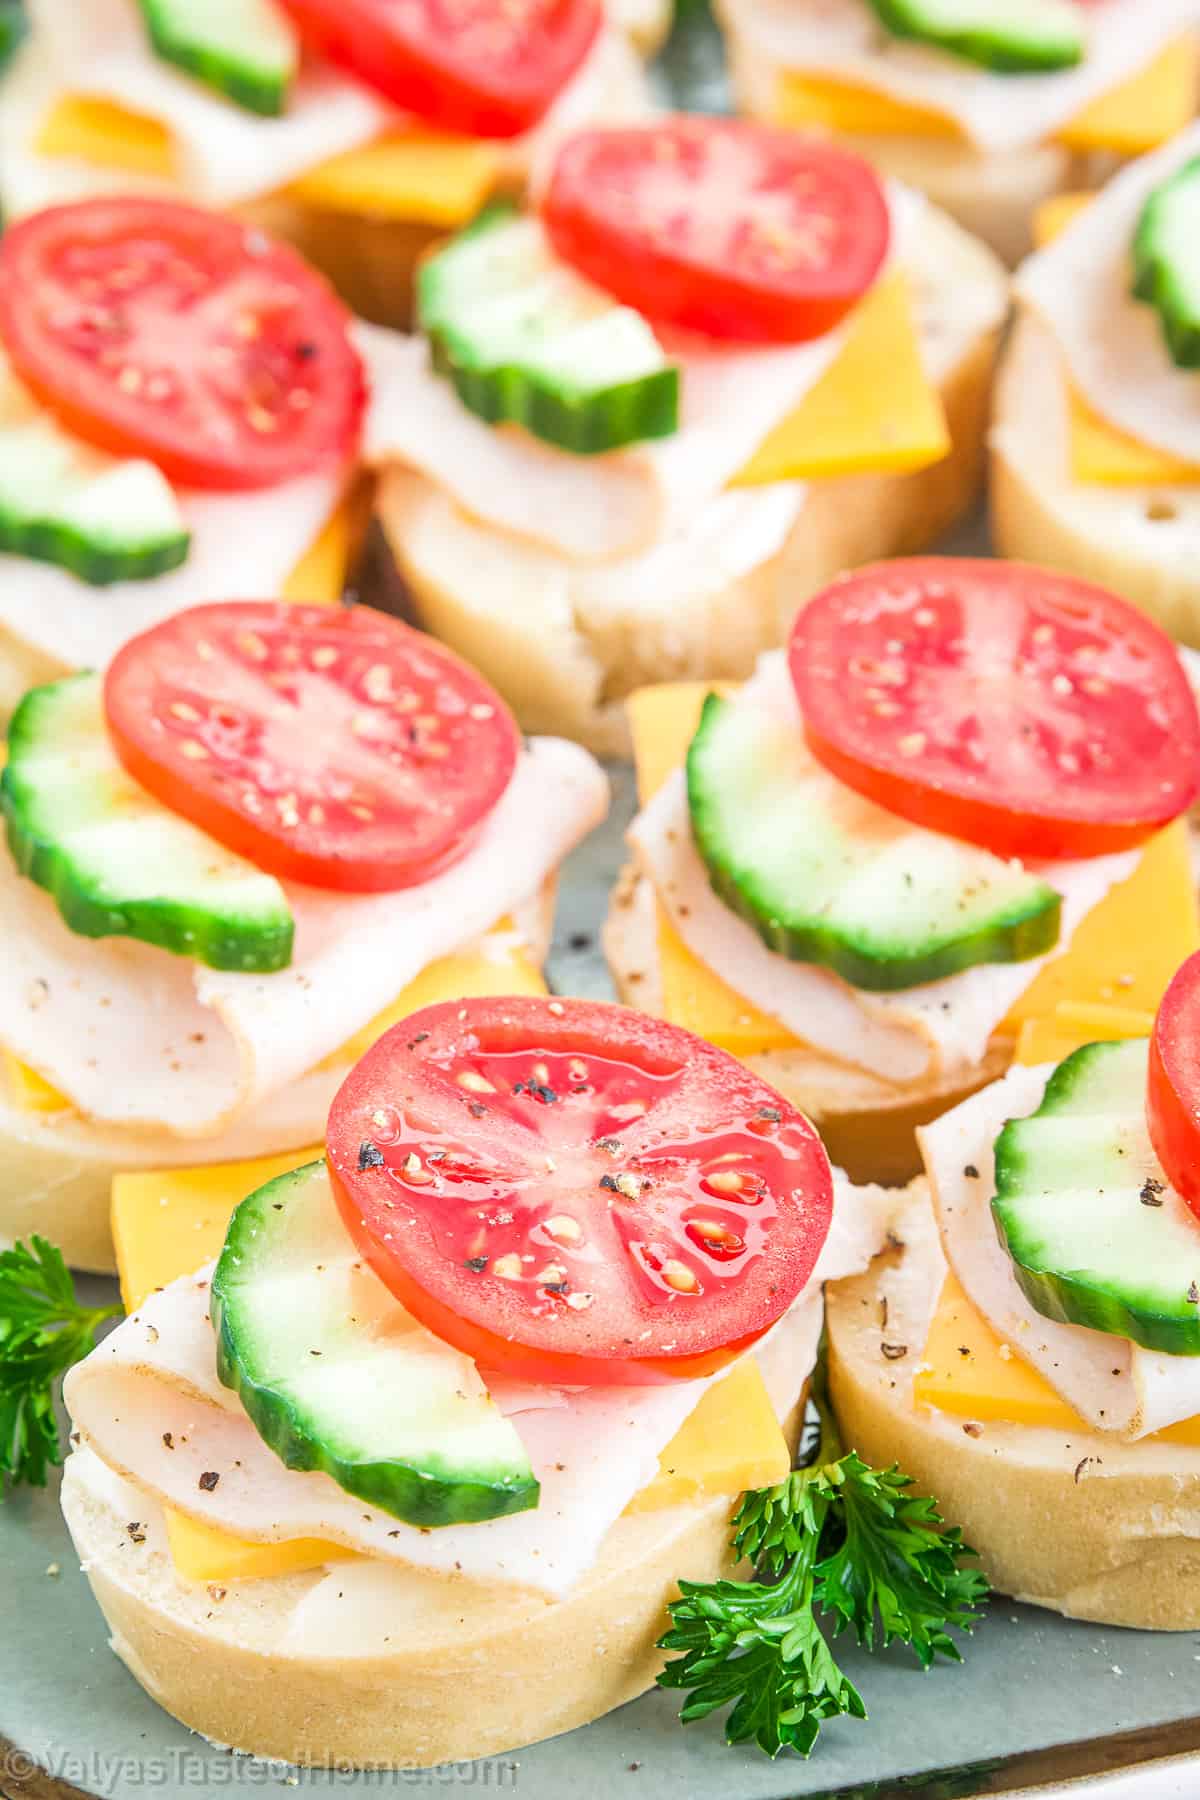 These appetizers showcase classic flavor combinations that are sure to please everyone. The smoked turkey, fresh cucumbers, and tangy tomatoes are always a hit.